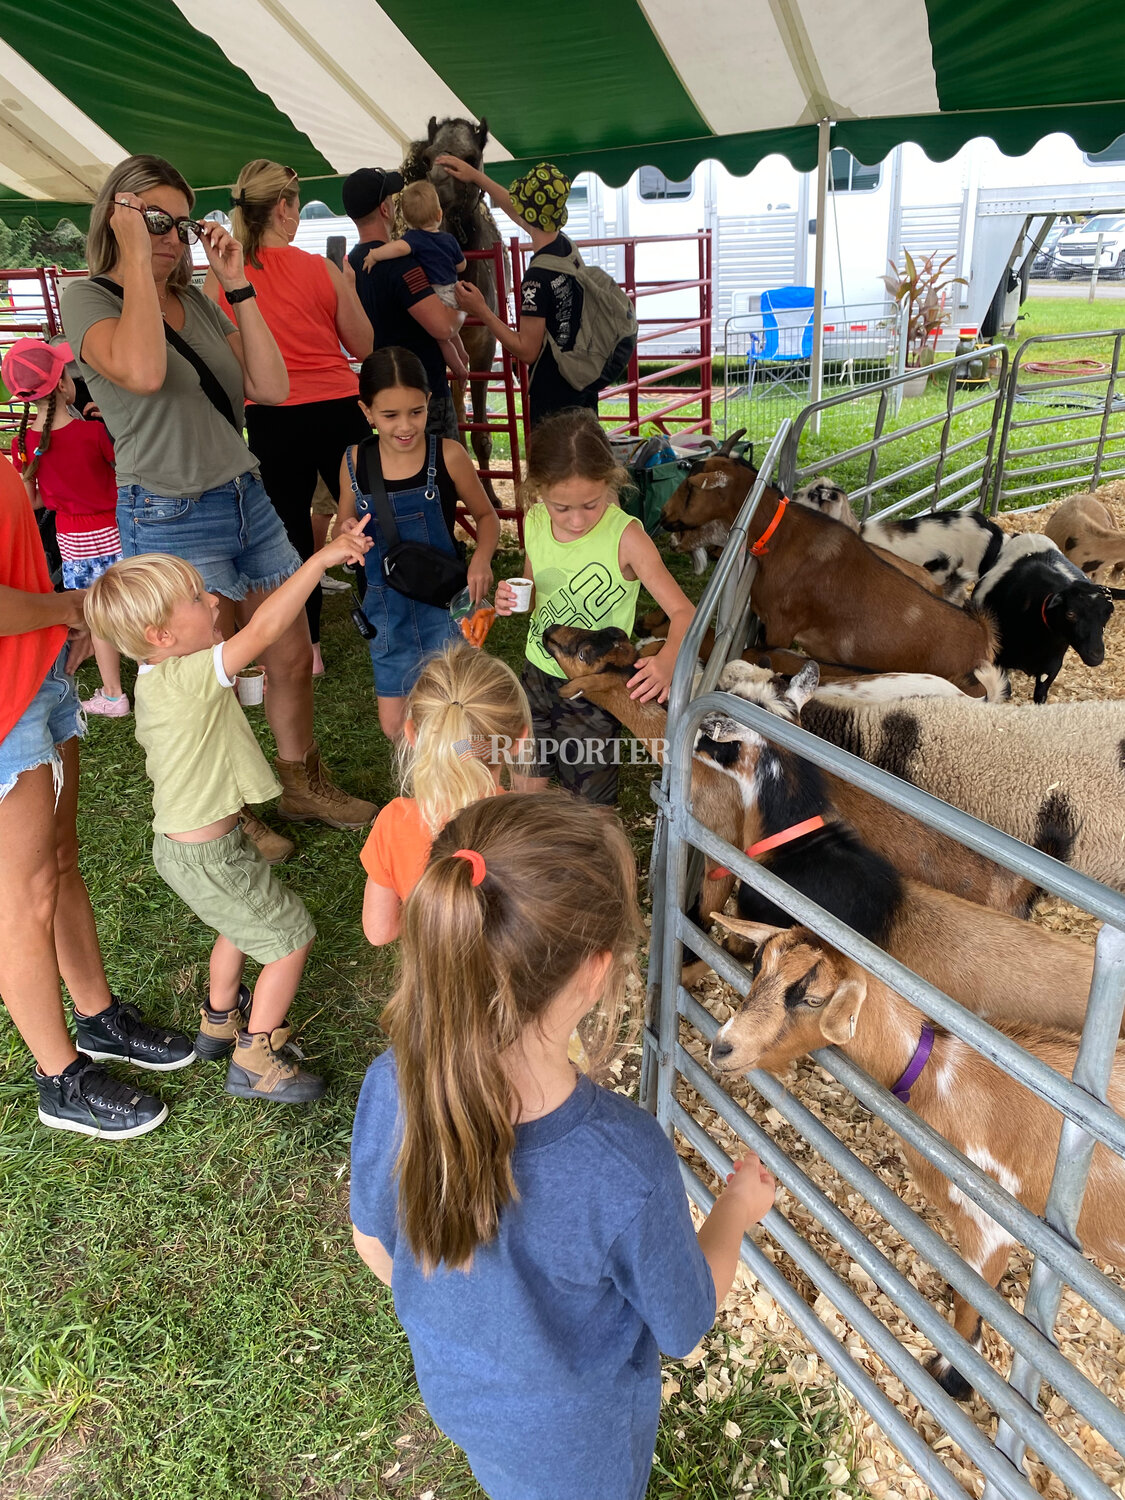 The petting zoo was a fairgoer favorite, Monday, Aug. 14.